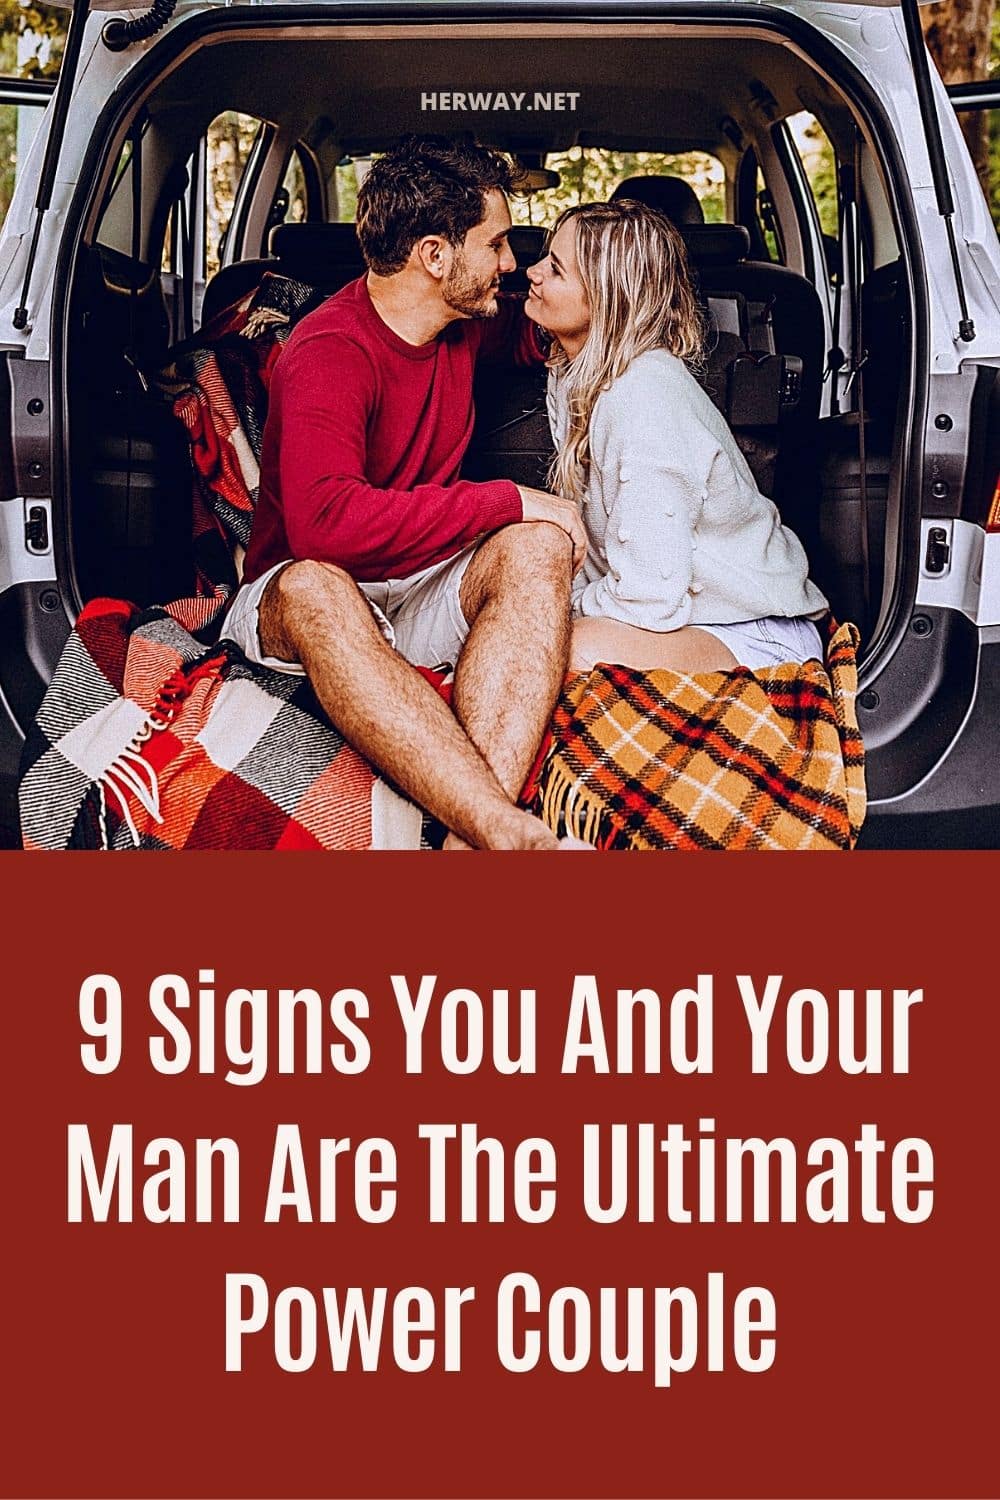 9 Signs You And Your Man Are The Ultimate Power Couple